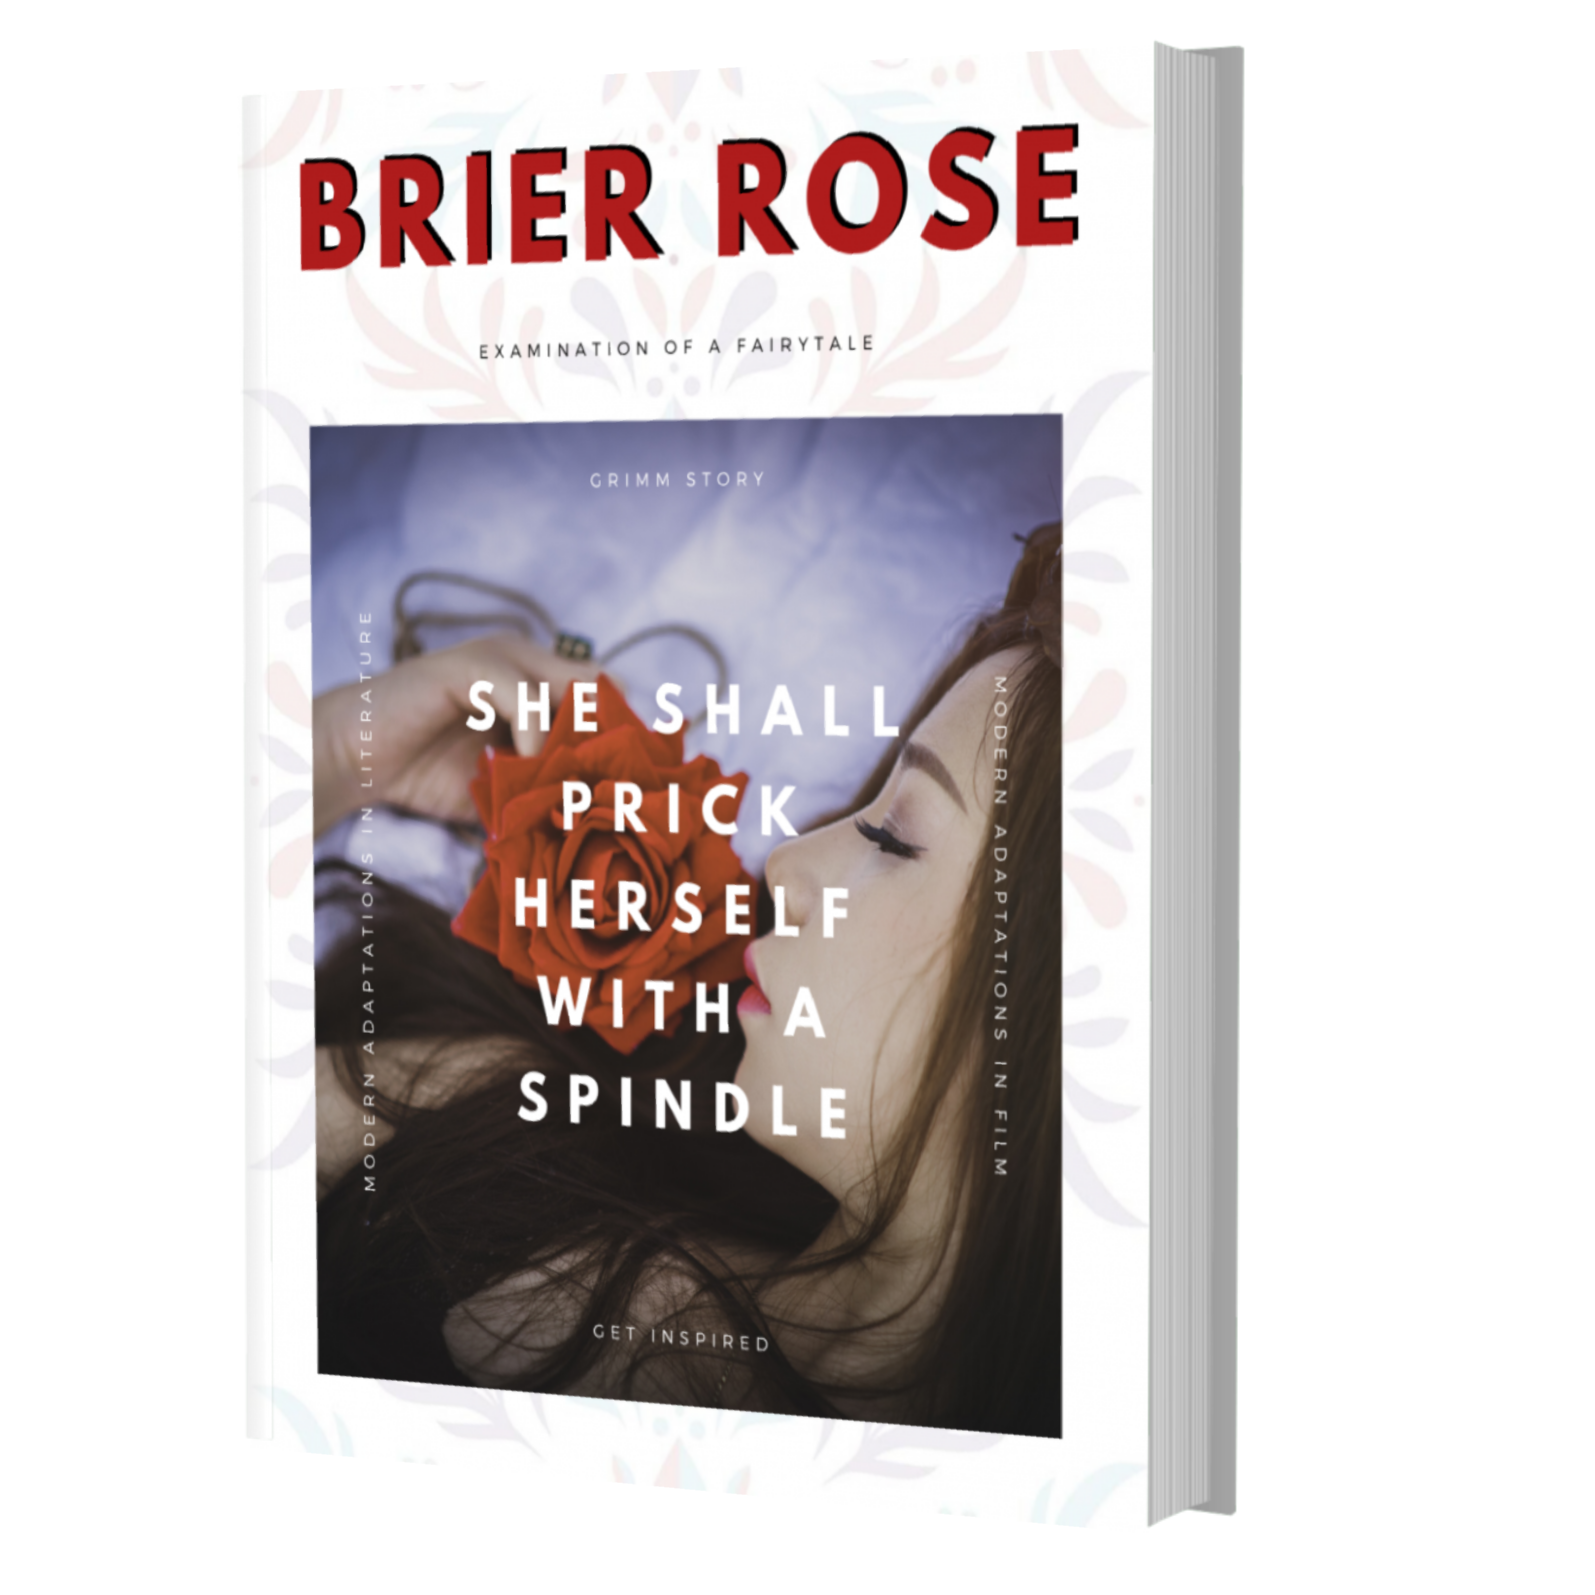 A mock book cover for the Brier Rose examinations of a fairytale ebook